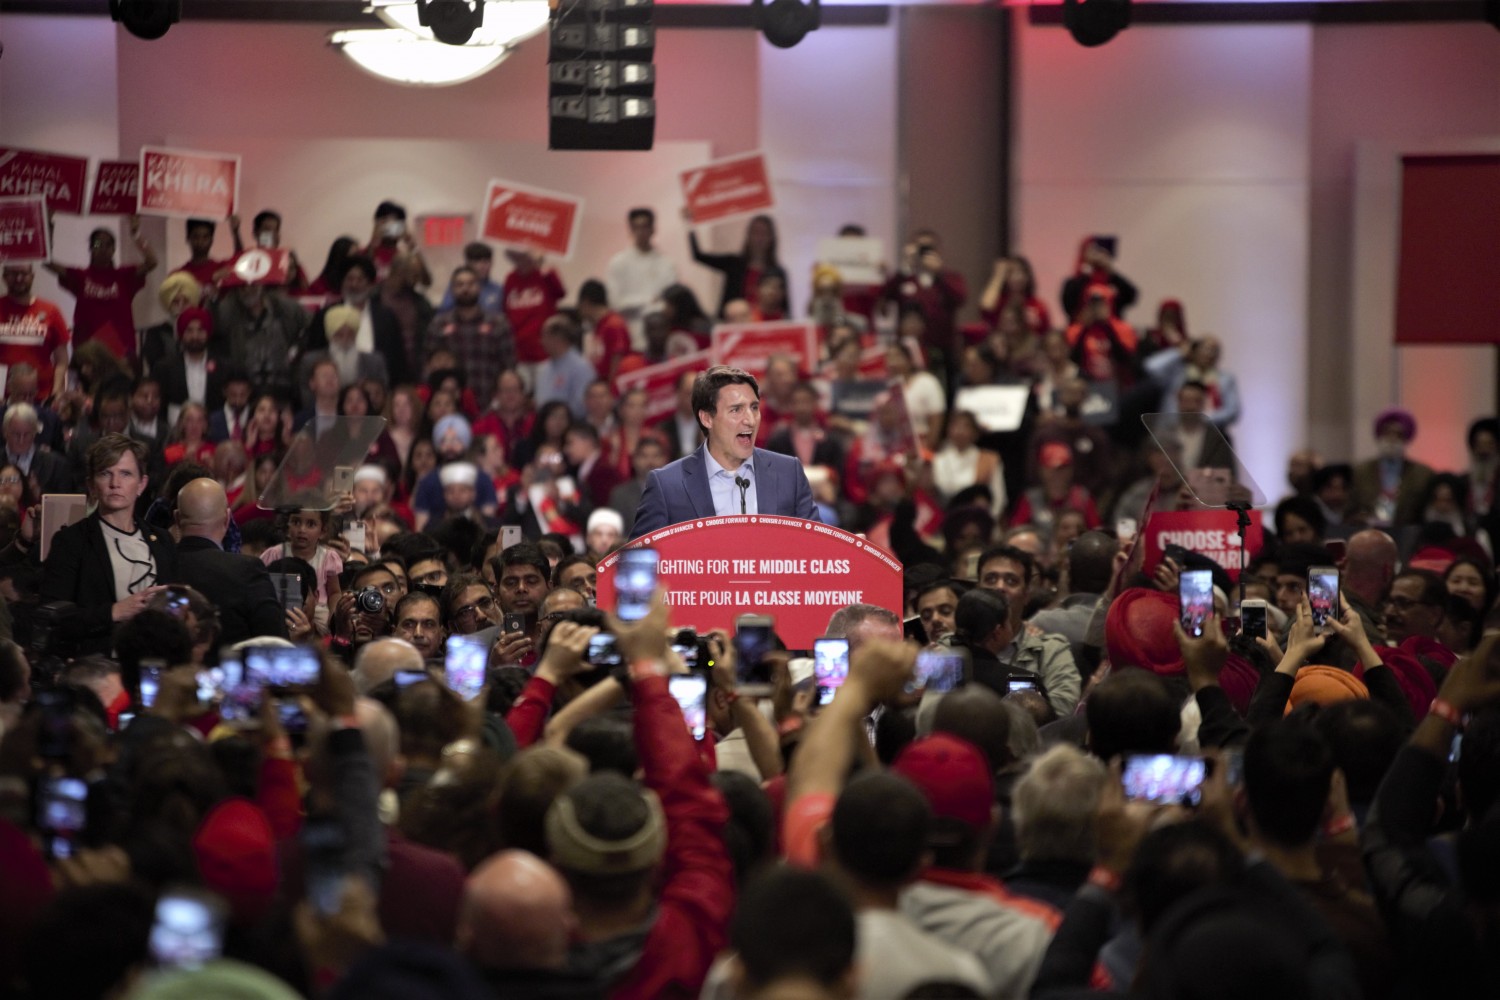 Trudeau was back in Peel, again, but fails to commit to specific local needs in Mississauga and Brampton